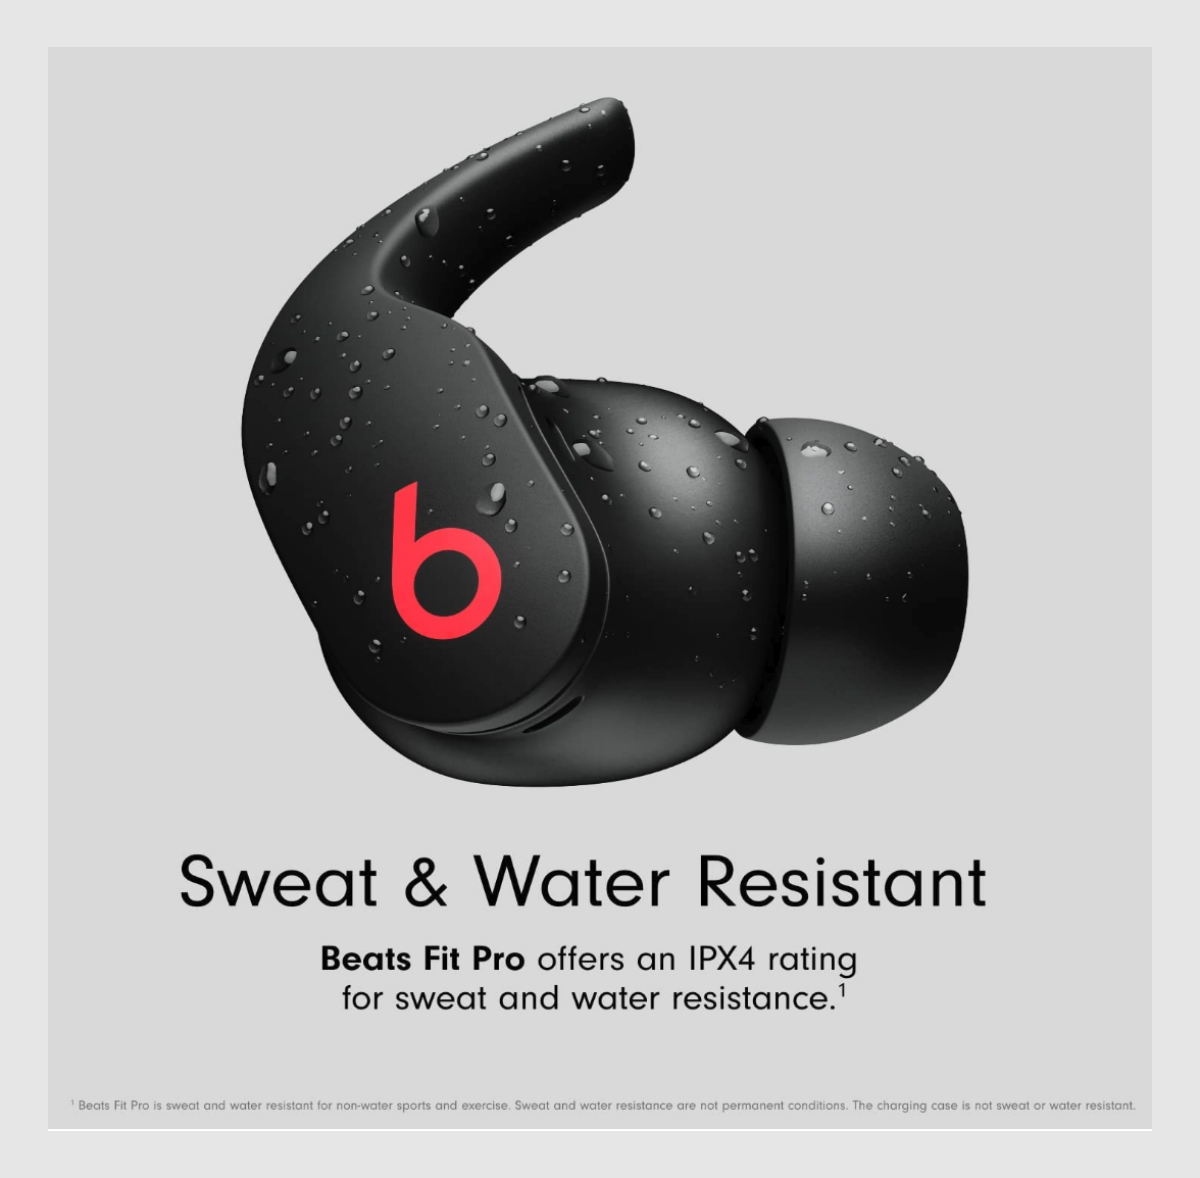 A single Beats Fit Pro demonstrating its water-resisting capability